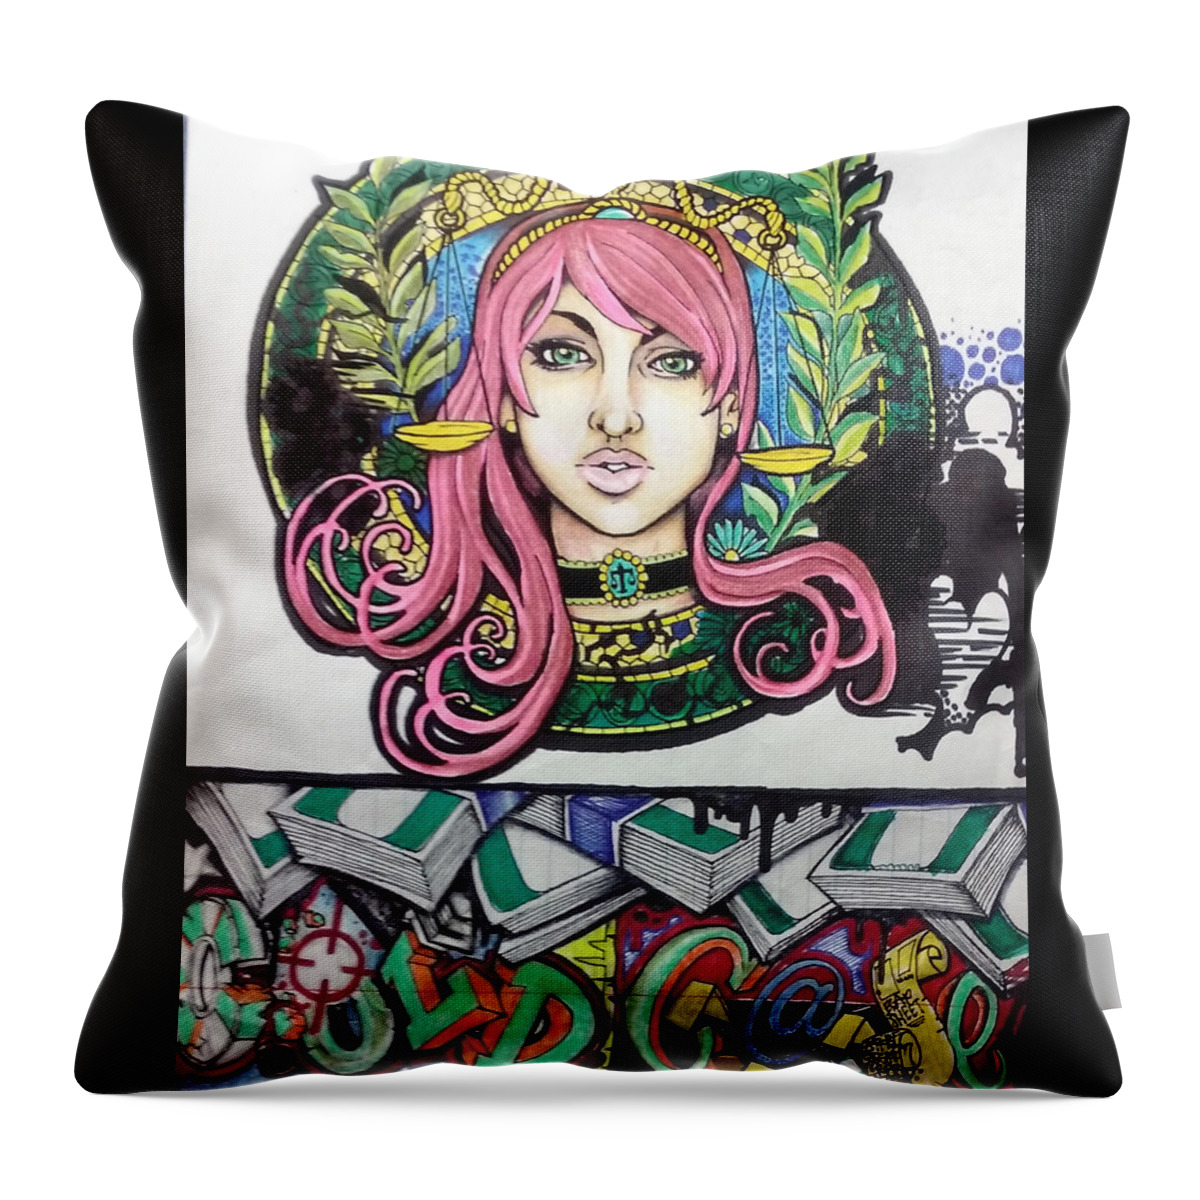 Black Art Throw Pillow featuring the drawing Fake Justice by Musafiir Salman